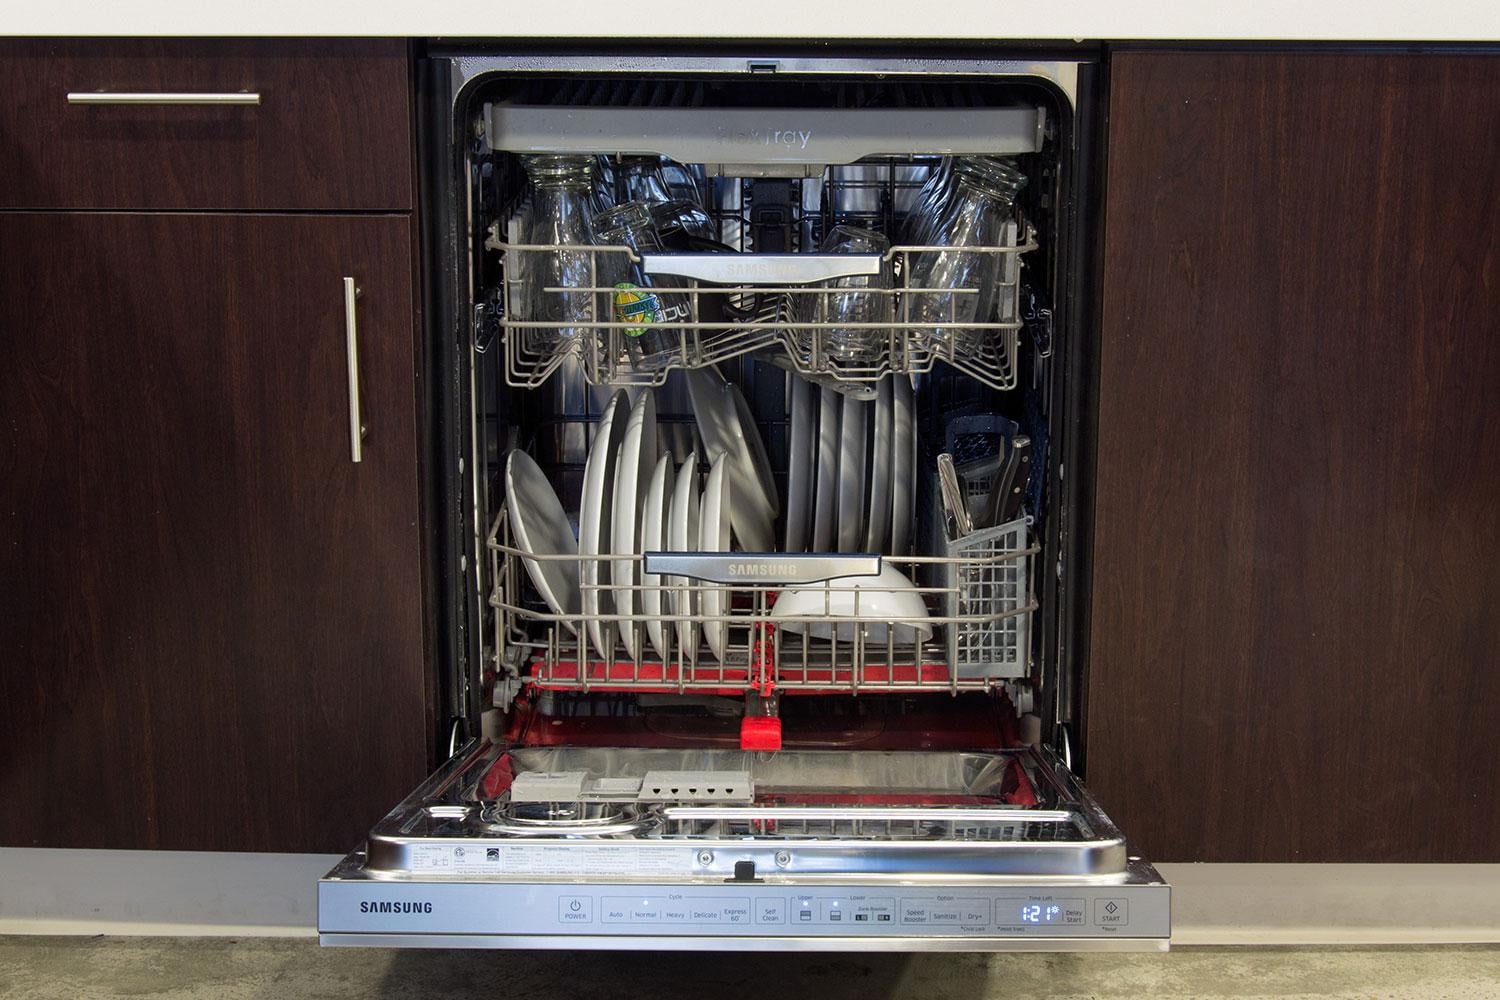 Ever Wonder What a Samsung Dishwasher Looks Like During a Cycle